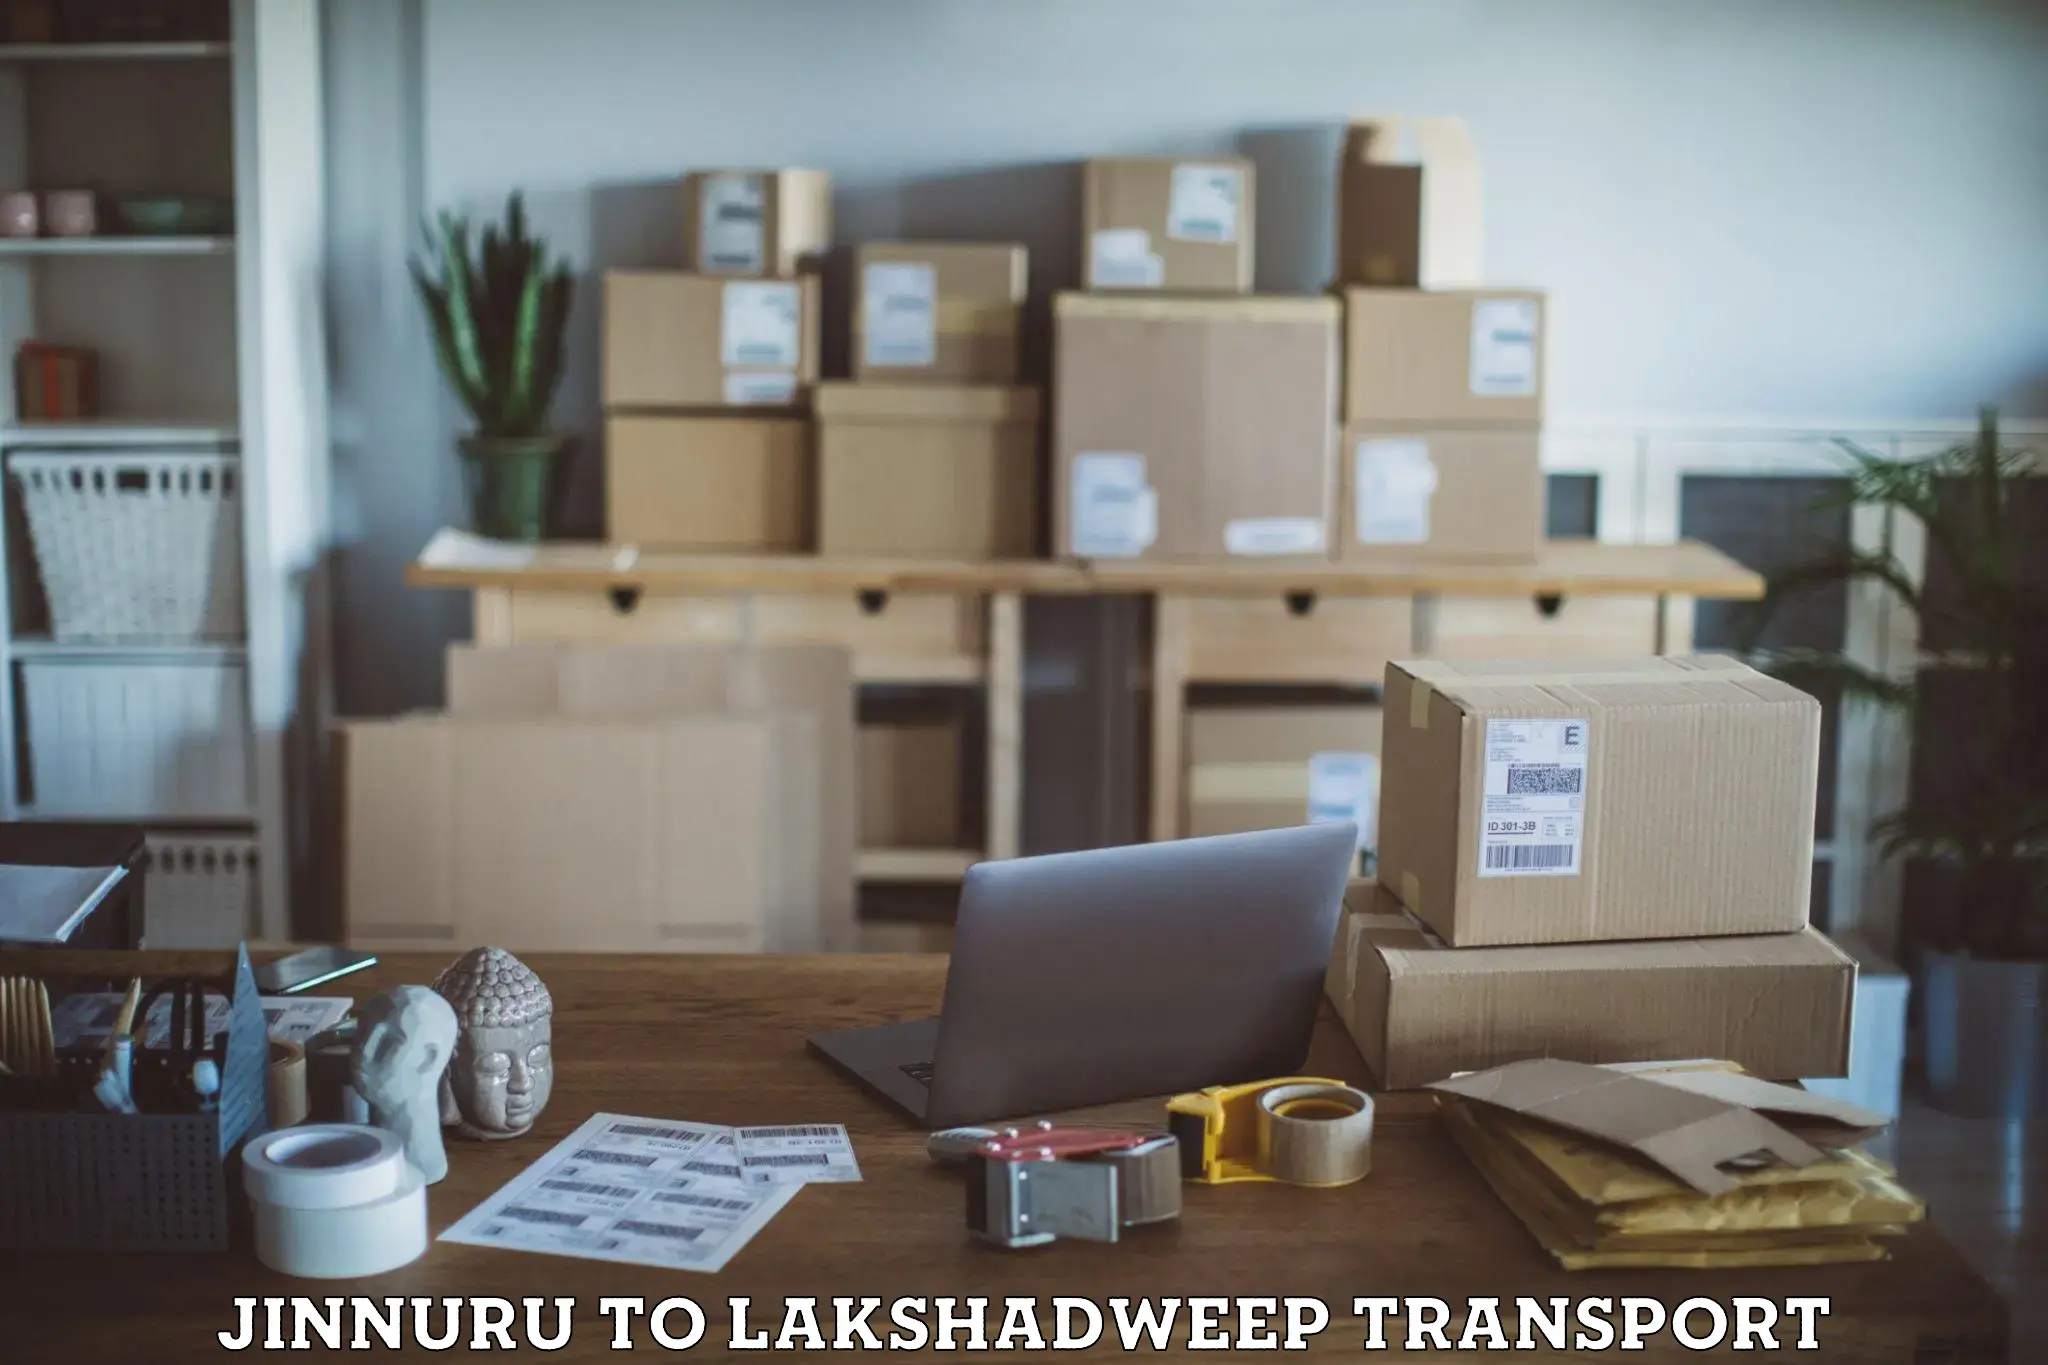 Transport bike from one state to another Jinnuru to Lakshadweep